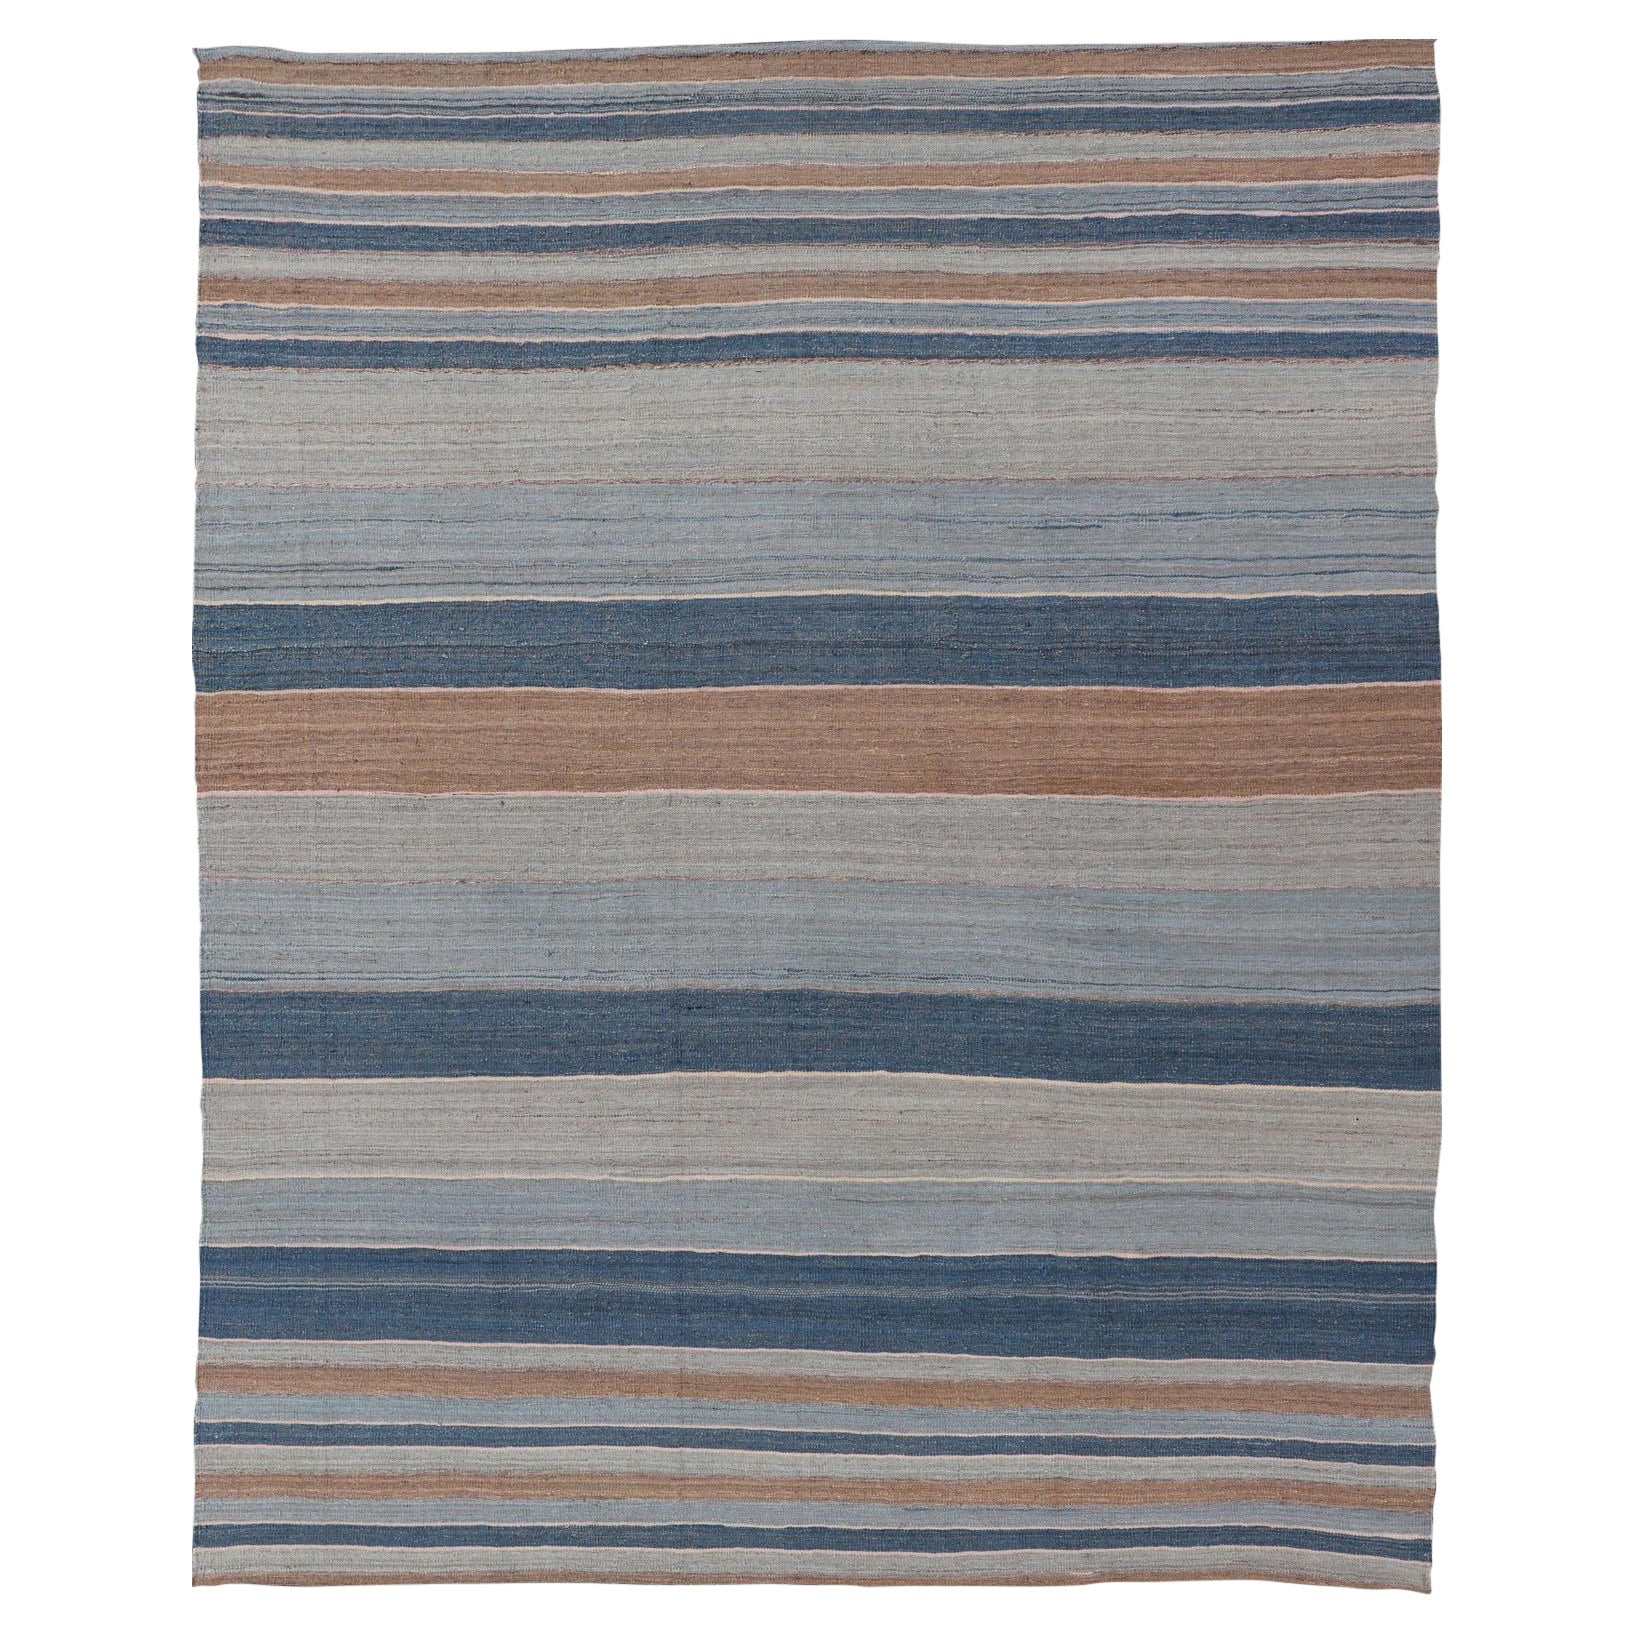 Modern Kilim Rug with Large Stripes in Shades of Blues, Brown, Gray For Sale